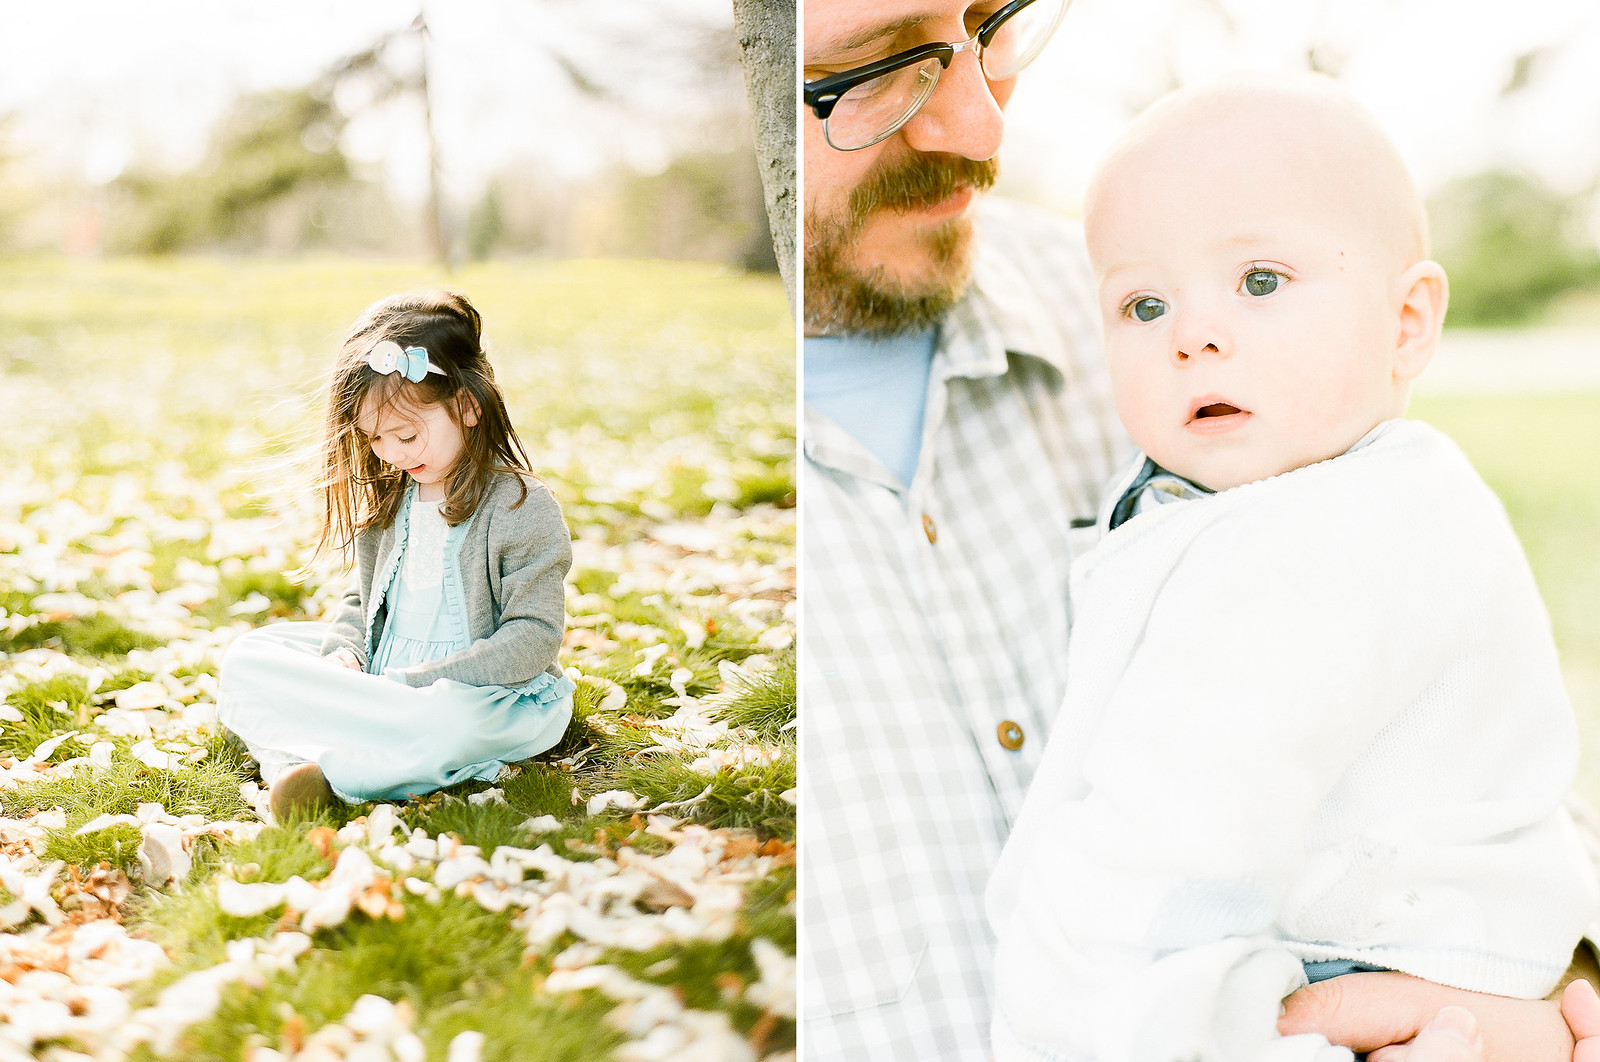 mandy mayberry photography boston and rhode island maternity and wedding film photographer